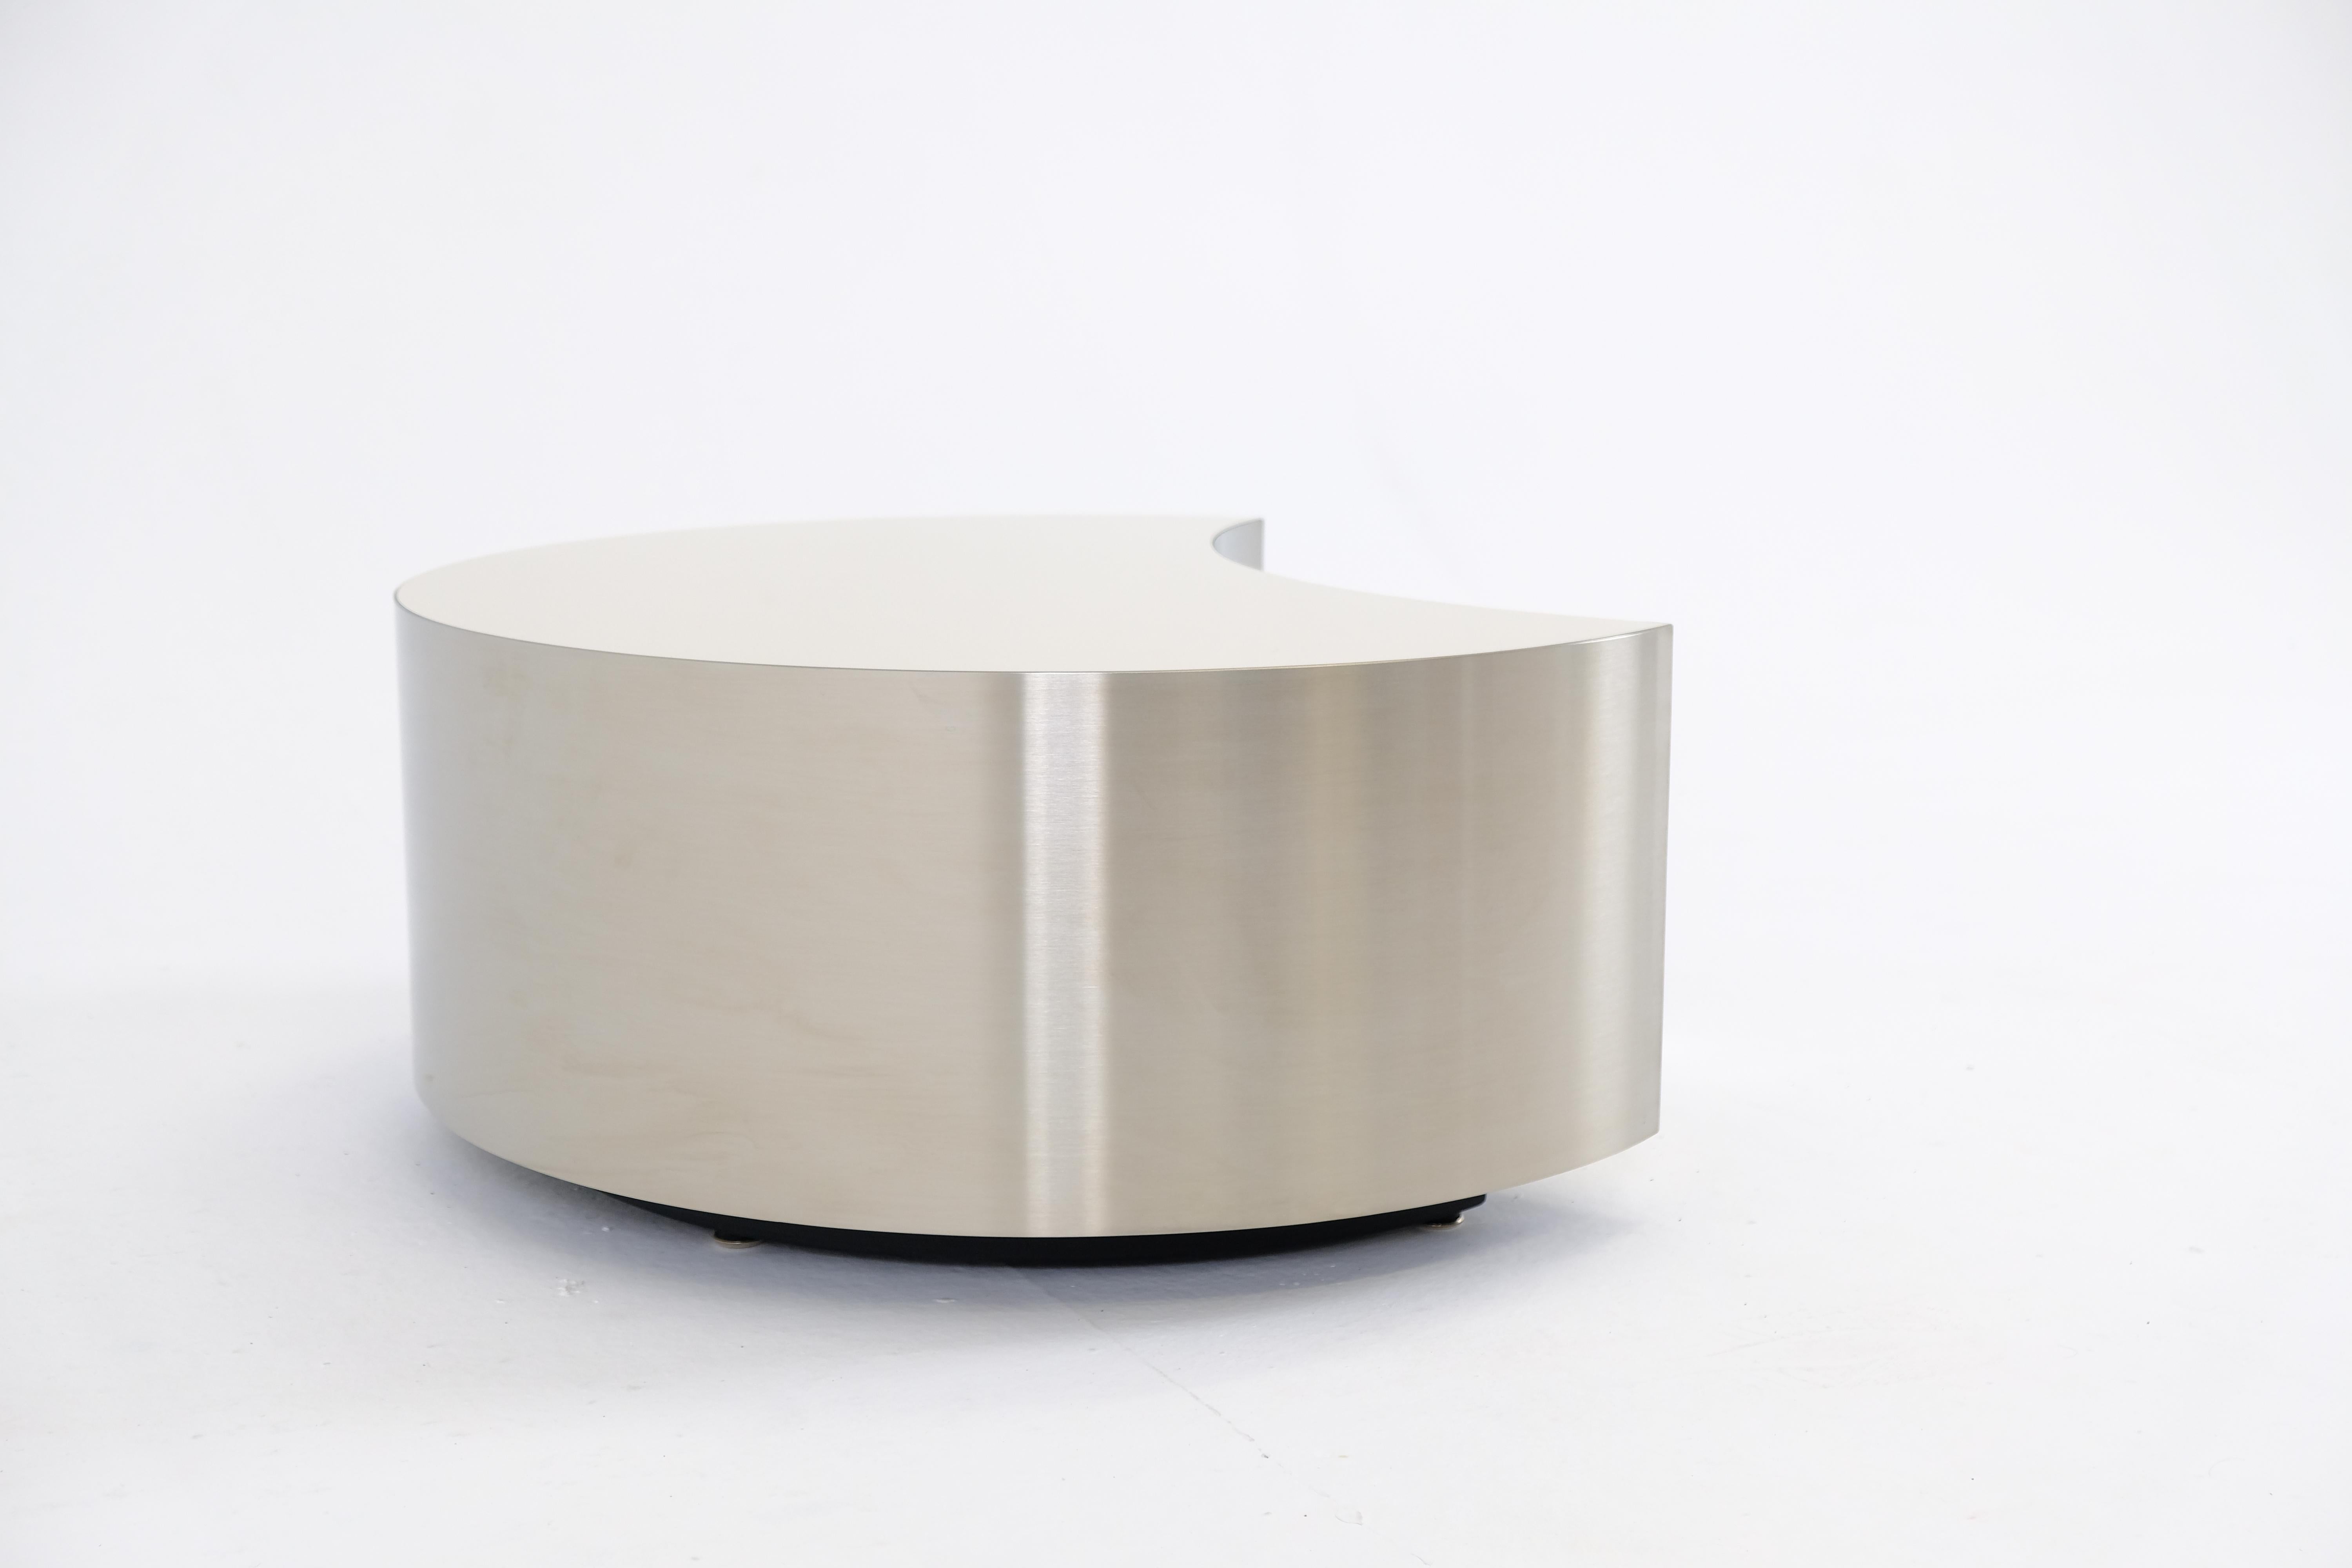 Luna Fusión Collection - Coffee Tables, Side Tables, Auxiliary Tables

Luna Fusión, a collection of moon-inspired coffee and auxiliary tables, blends two premium materials to create a stunning aesthetic: the high-gloss laminate tabletop is elegantly